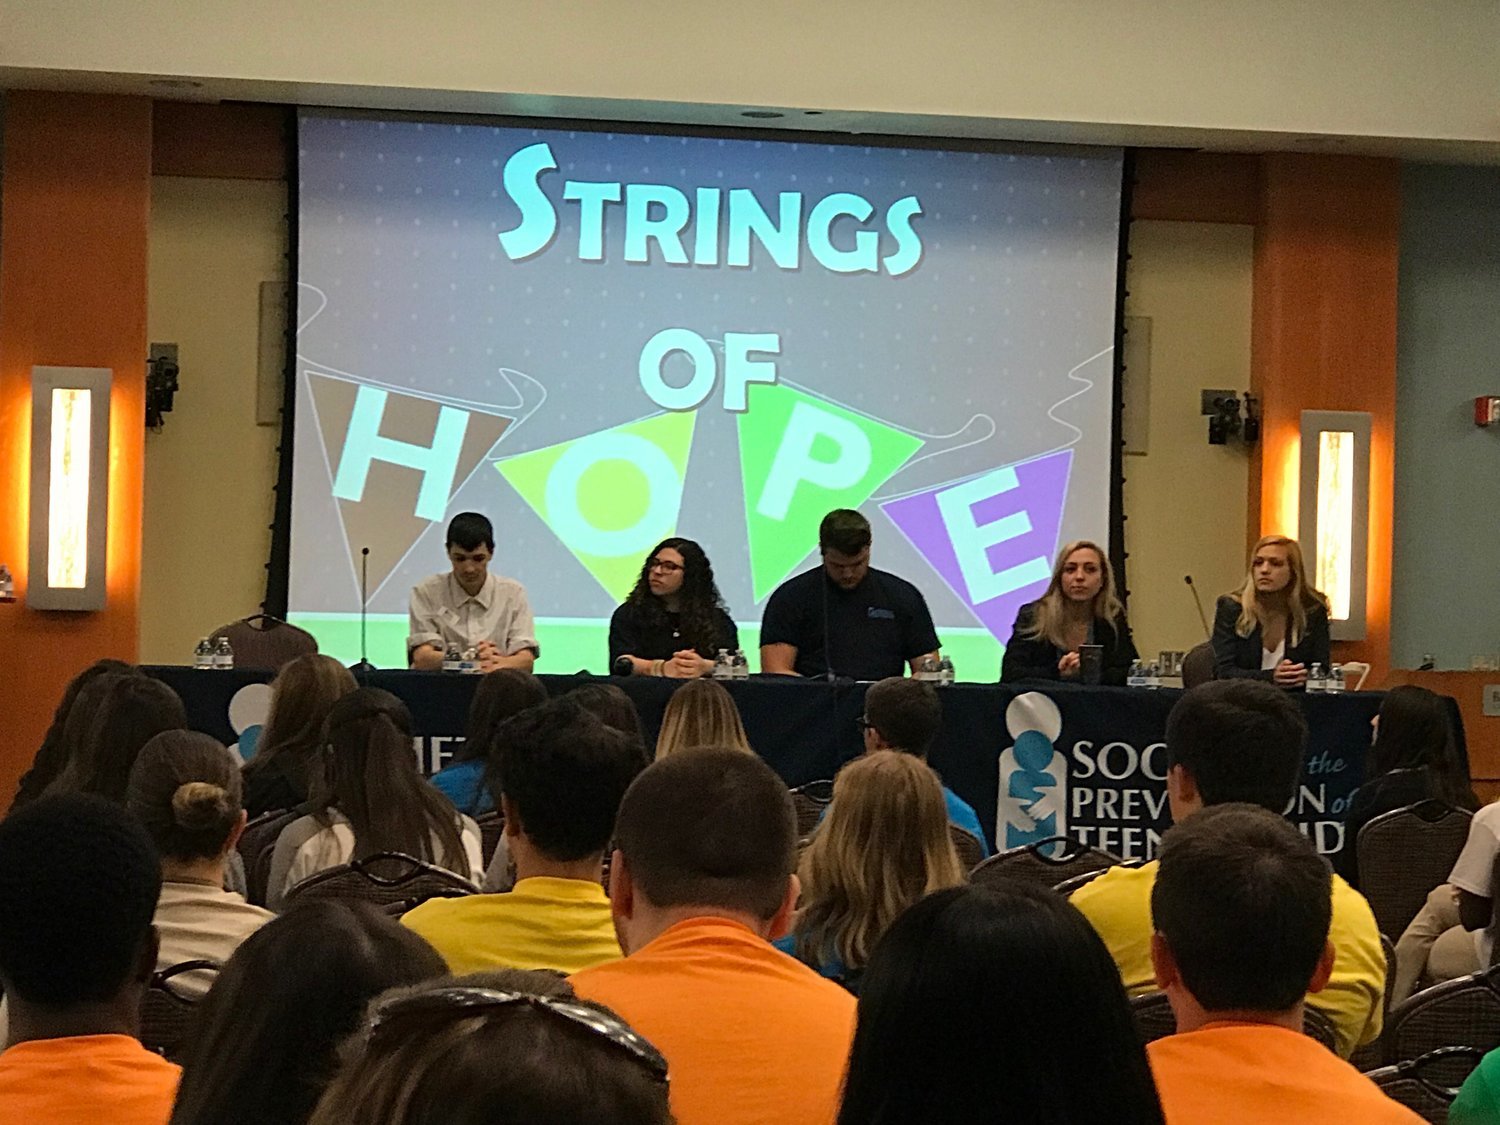 At the event in 2019, the summit kicked off with a “Strings of Hope” resiliency panel, led by Stacy Brief and others. The same panel started this year’s summit.